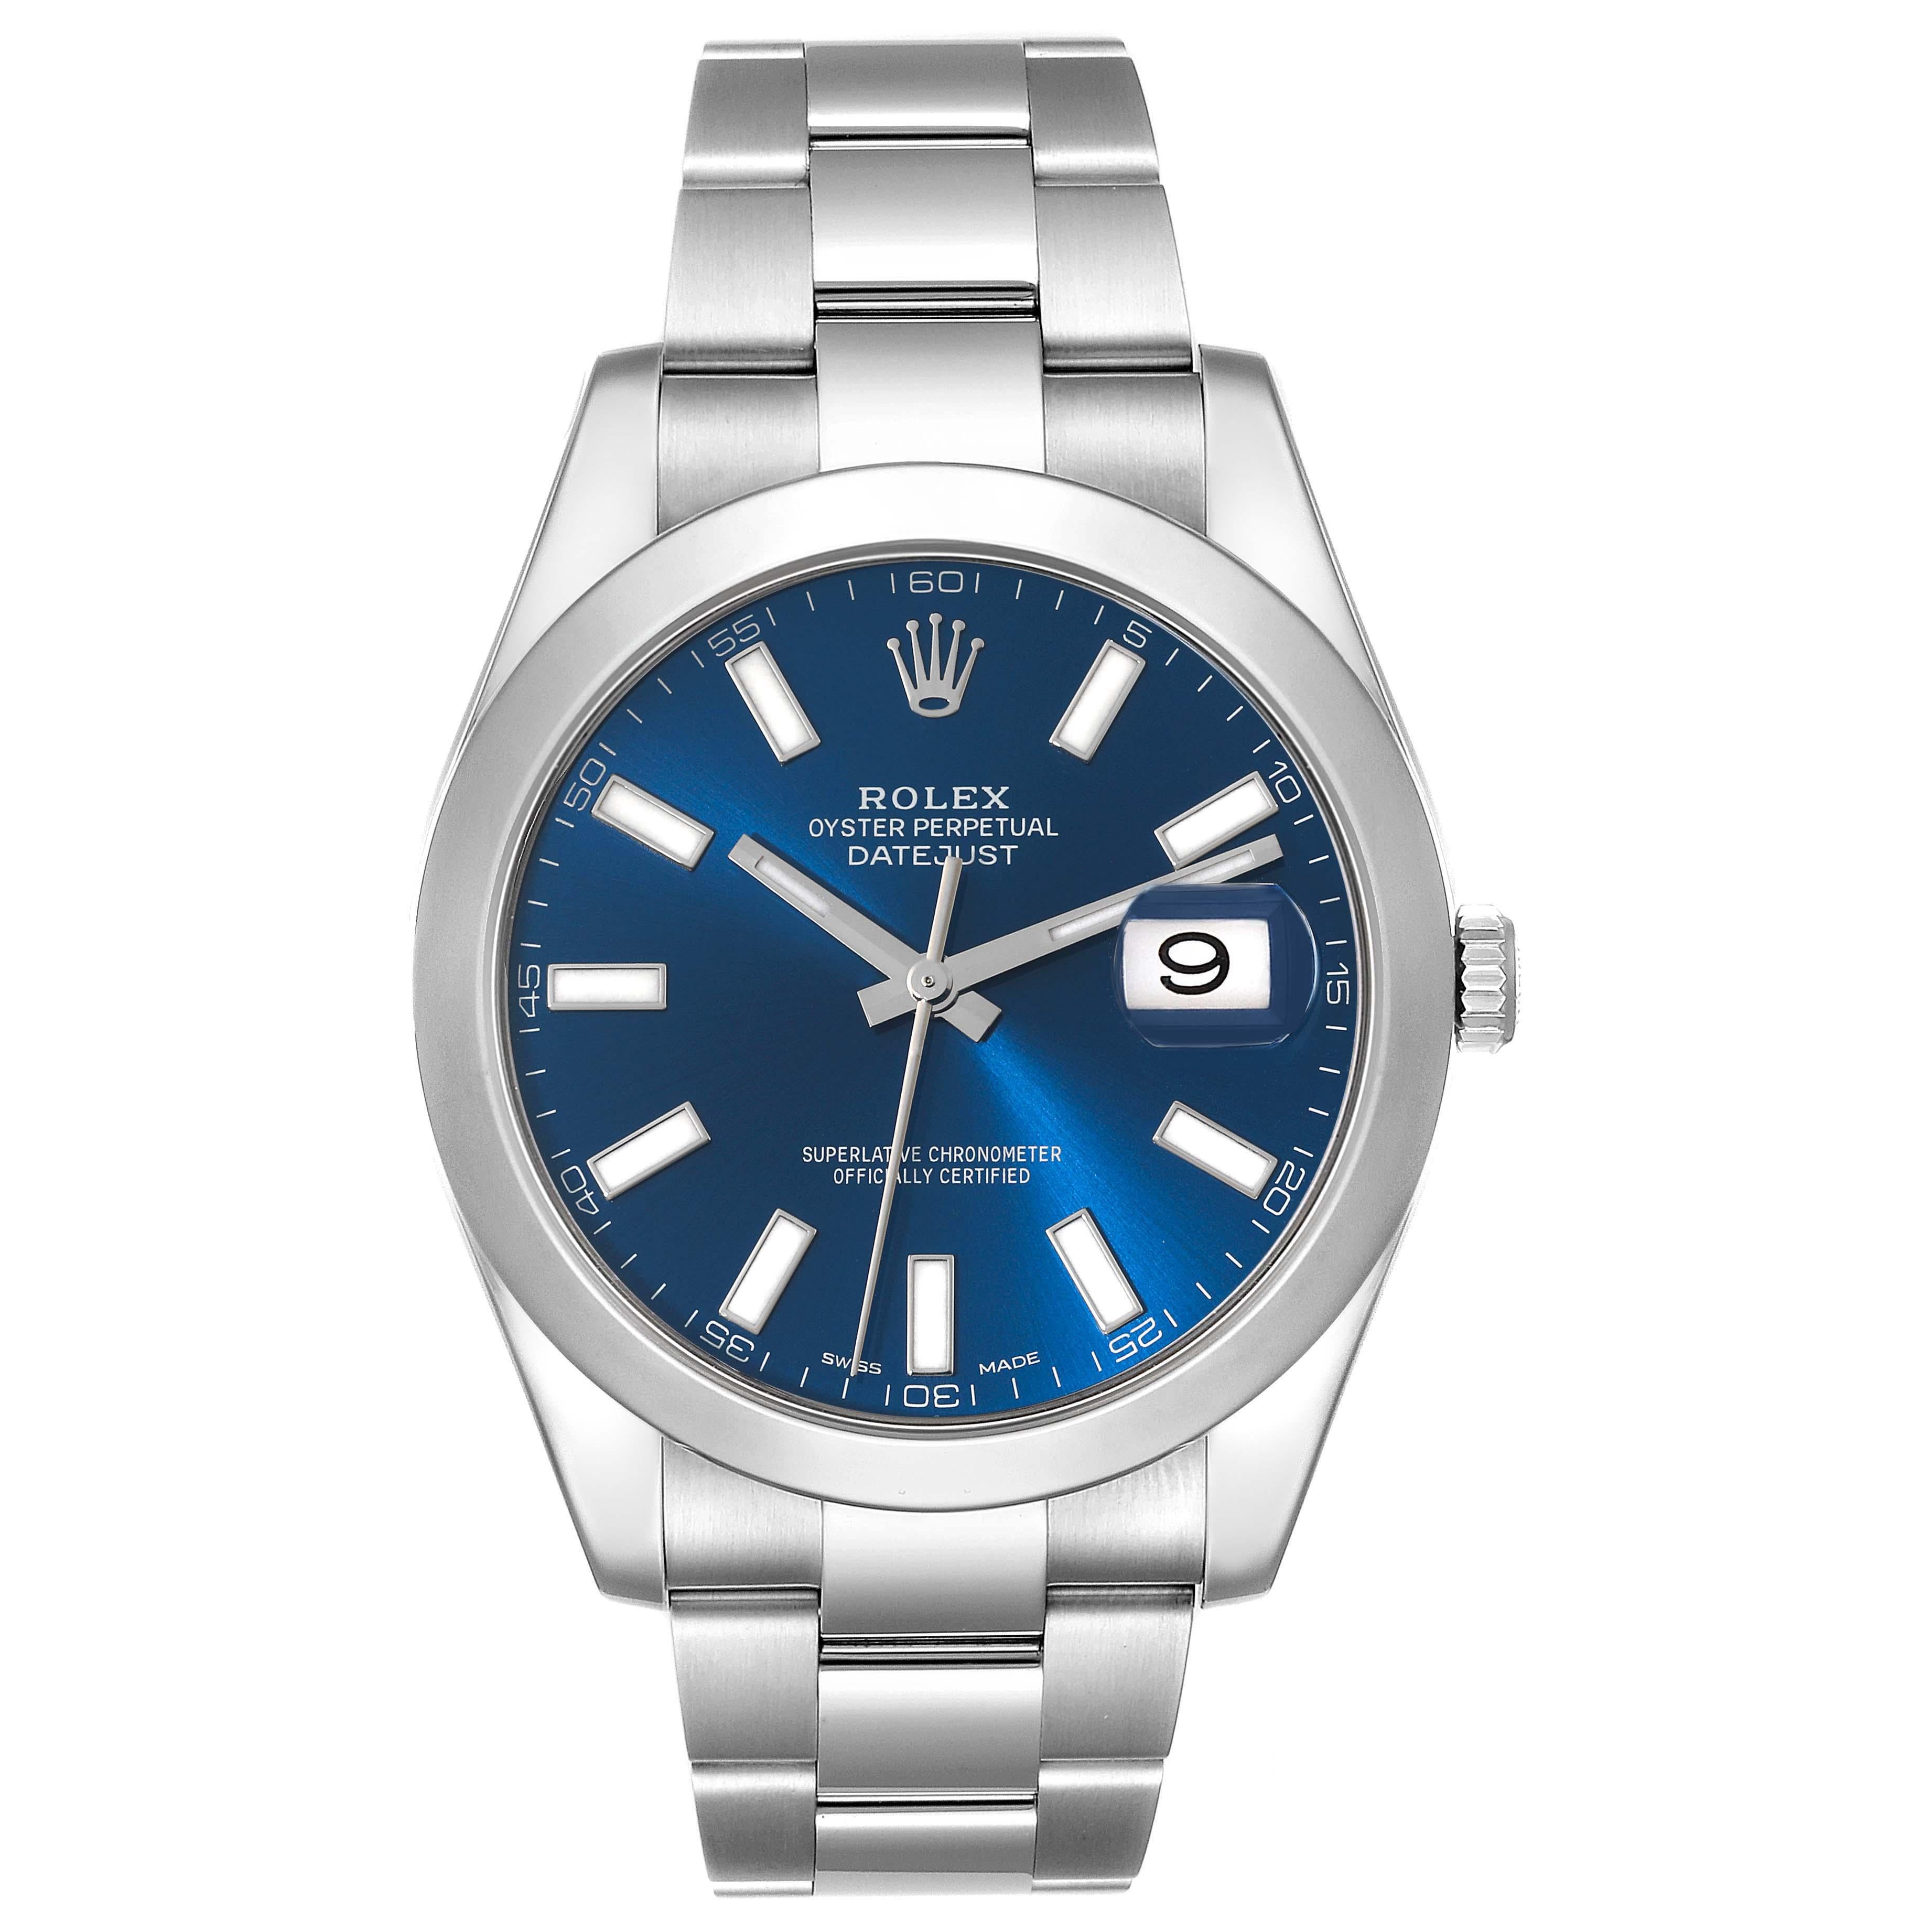 Rolex Datejust II 41 Blue Baton Dial Oyster Bracelet Steel Mens Watch 116300. Officially certified chronometer automatic self-winding movement. Stainless steel case 41 mm in diameter. Rolex logo on the crown. Stainless steel smooth bezel. Scratch